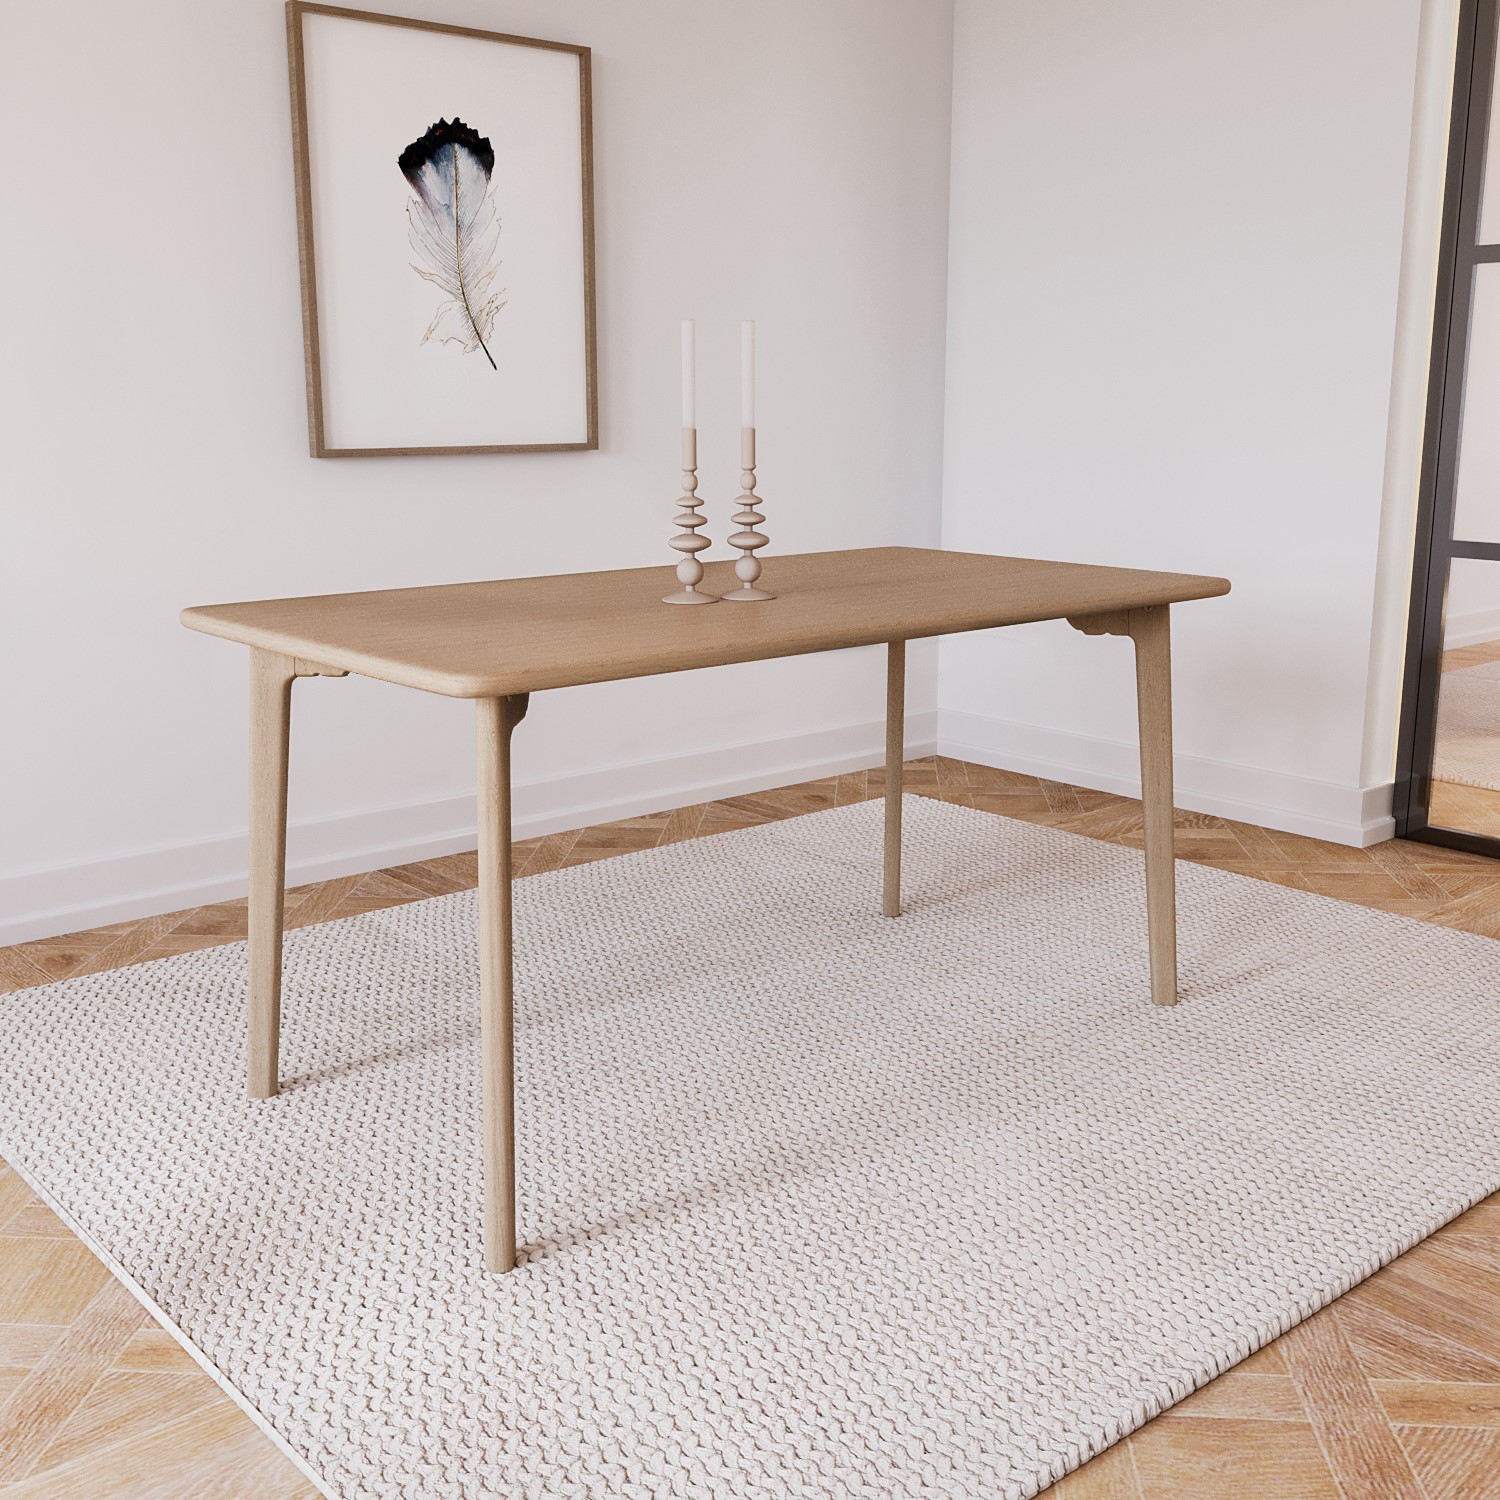 Photo of Large oak modern dining table - seats 4 - anders